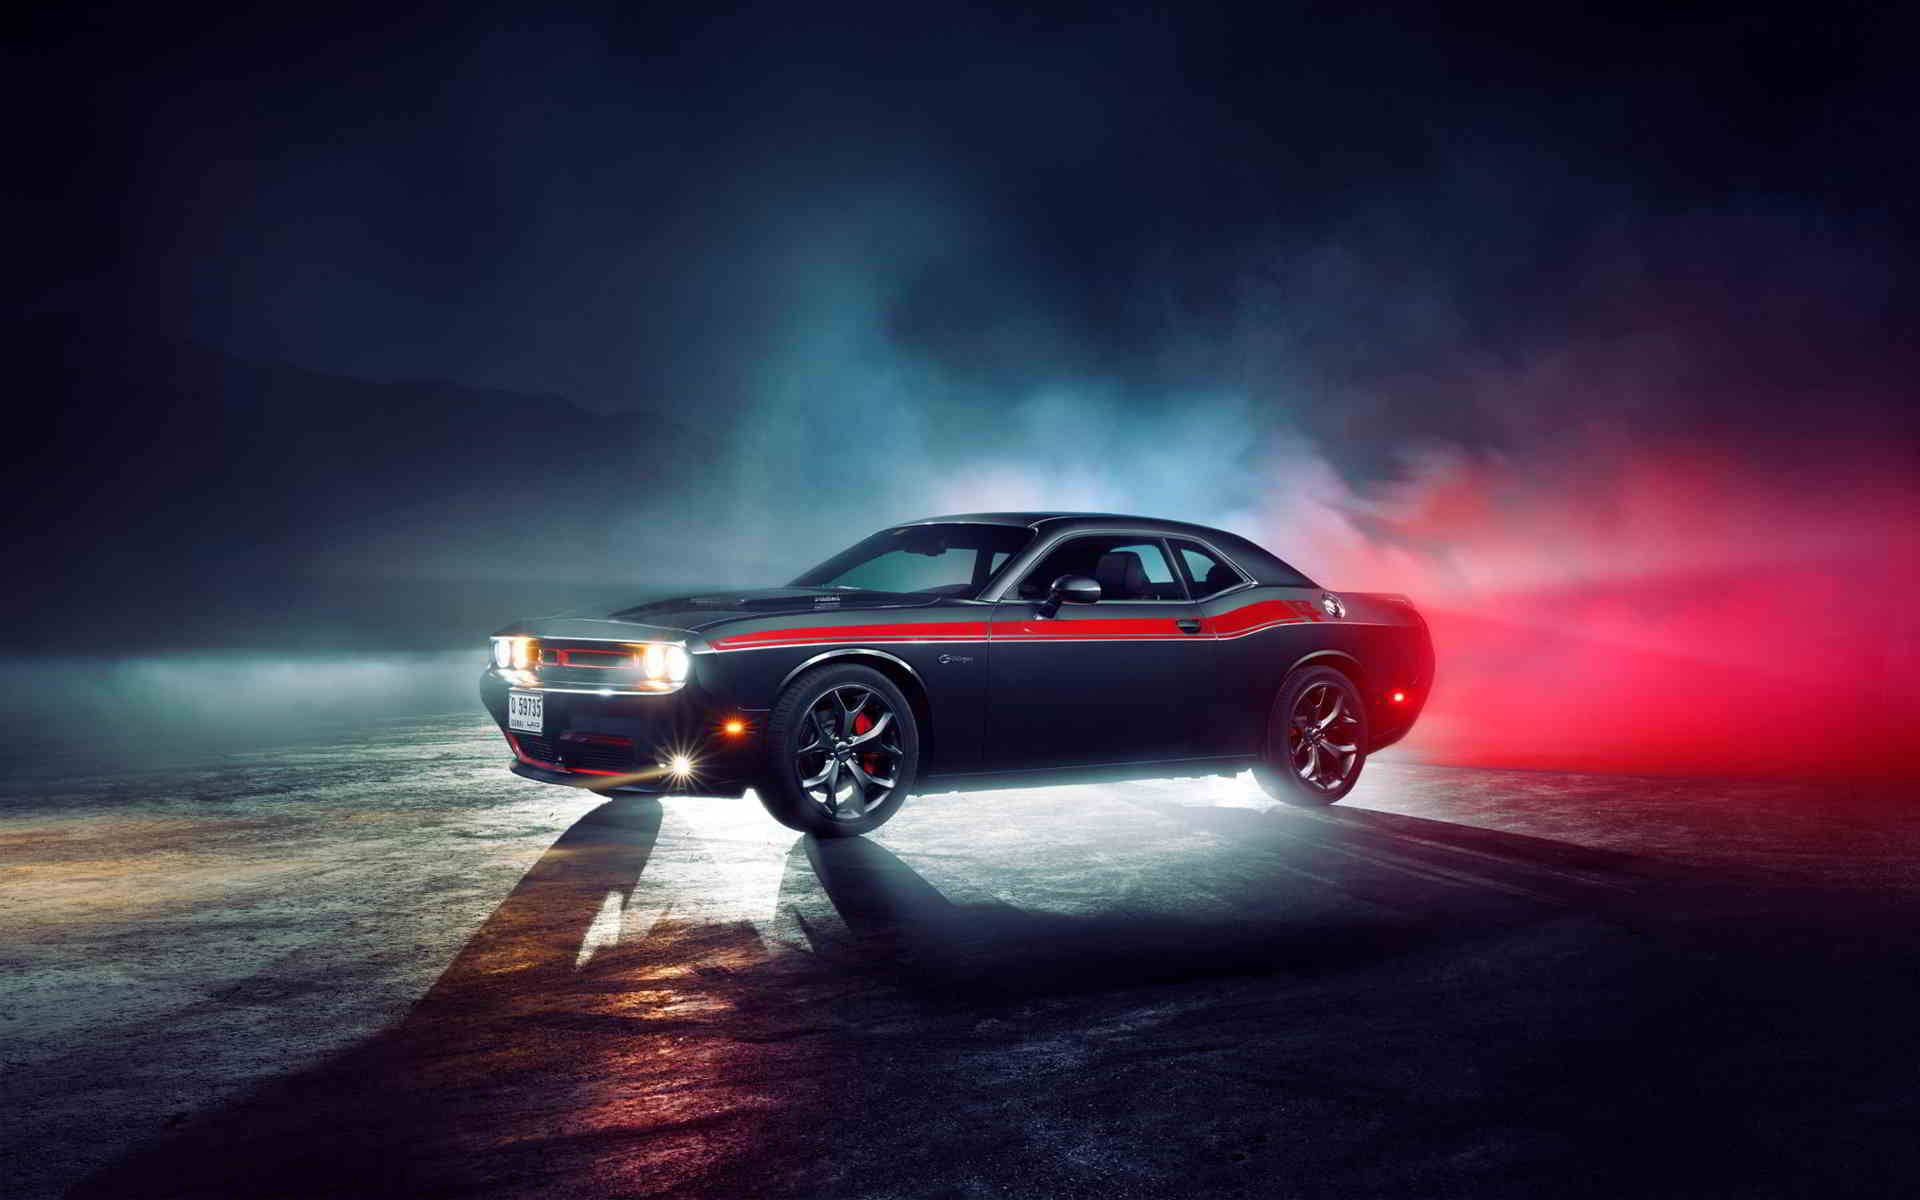 Muscle Car Magic - A Dodge Challenger Roars Into the Night Wallpaper